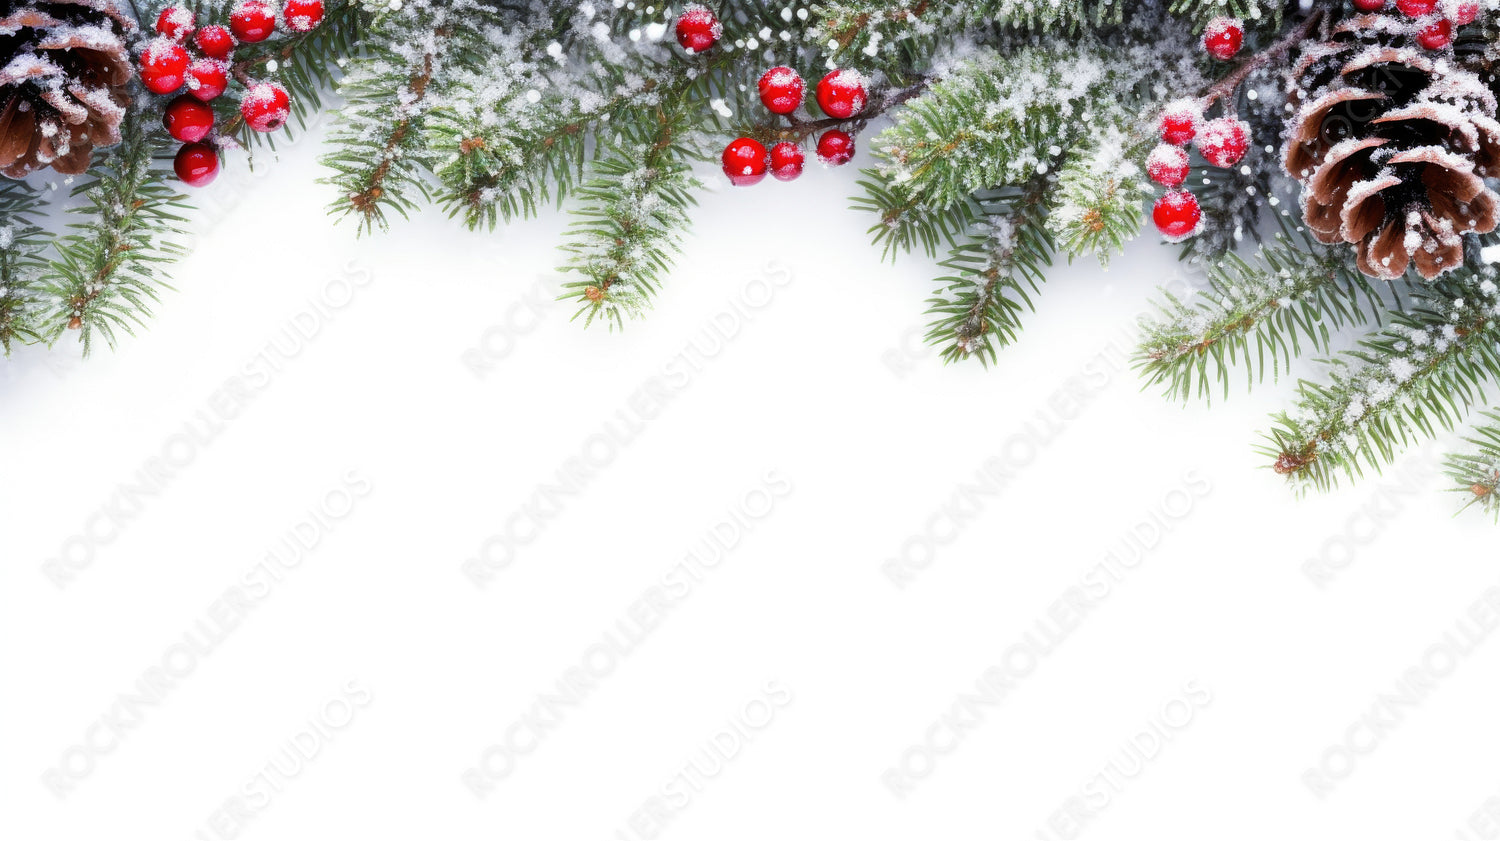 Festive Christmas border frame - green fir branches decorated with red berries and cones,covered with snow, isolated on white, copy space.